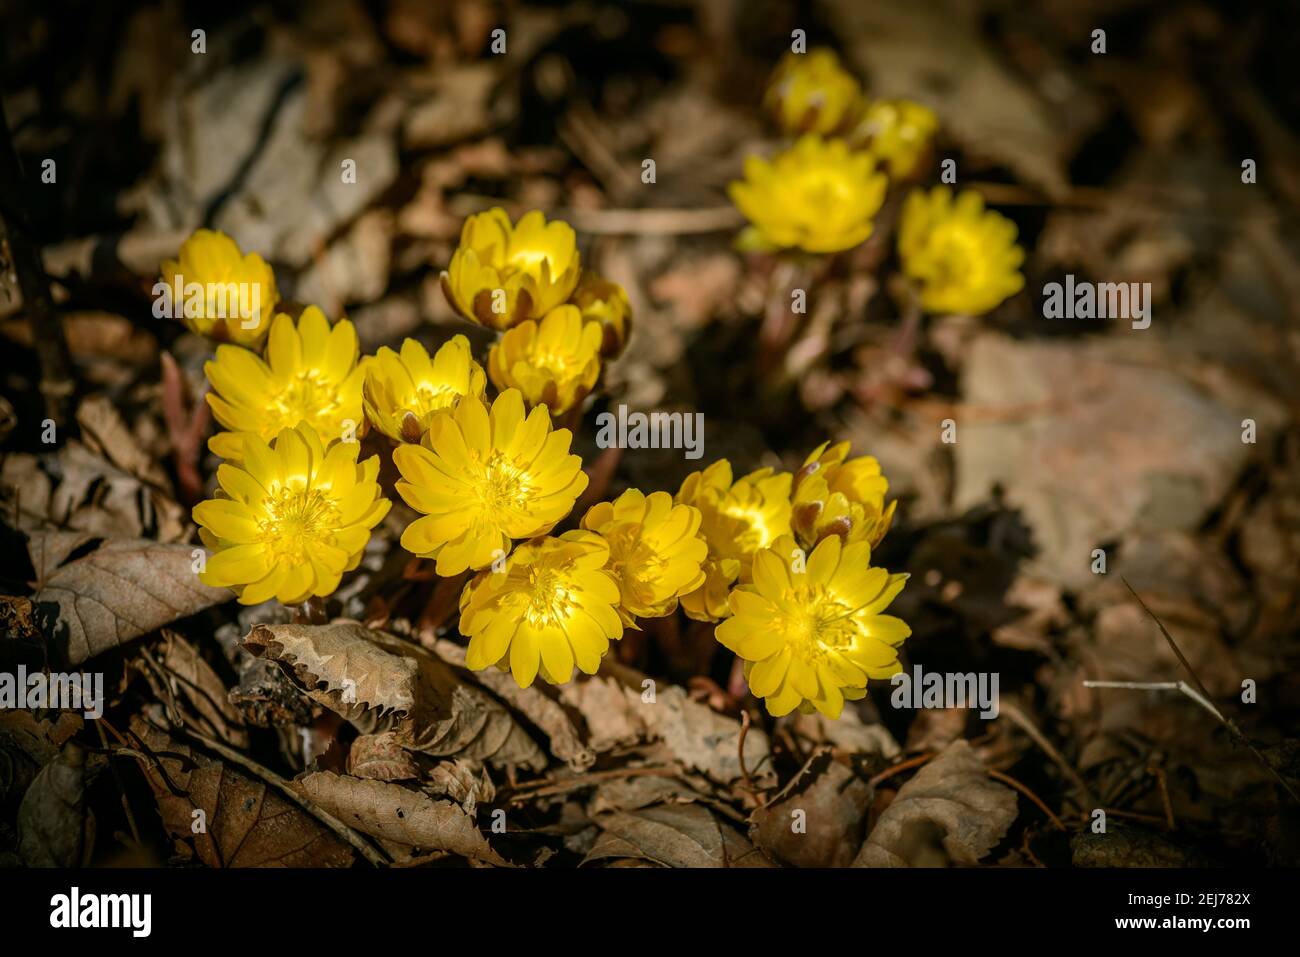 Close up view of the first spring flowers among withered leaves. Selective focus with shallow depth of field. Stock Photo